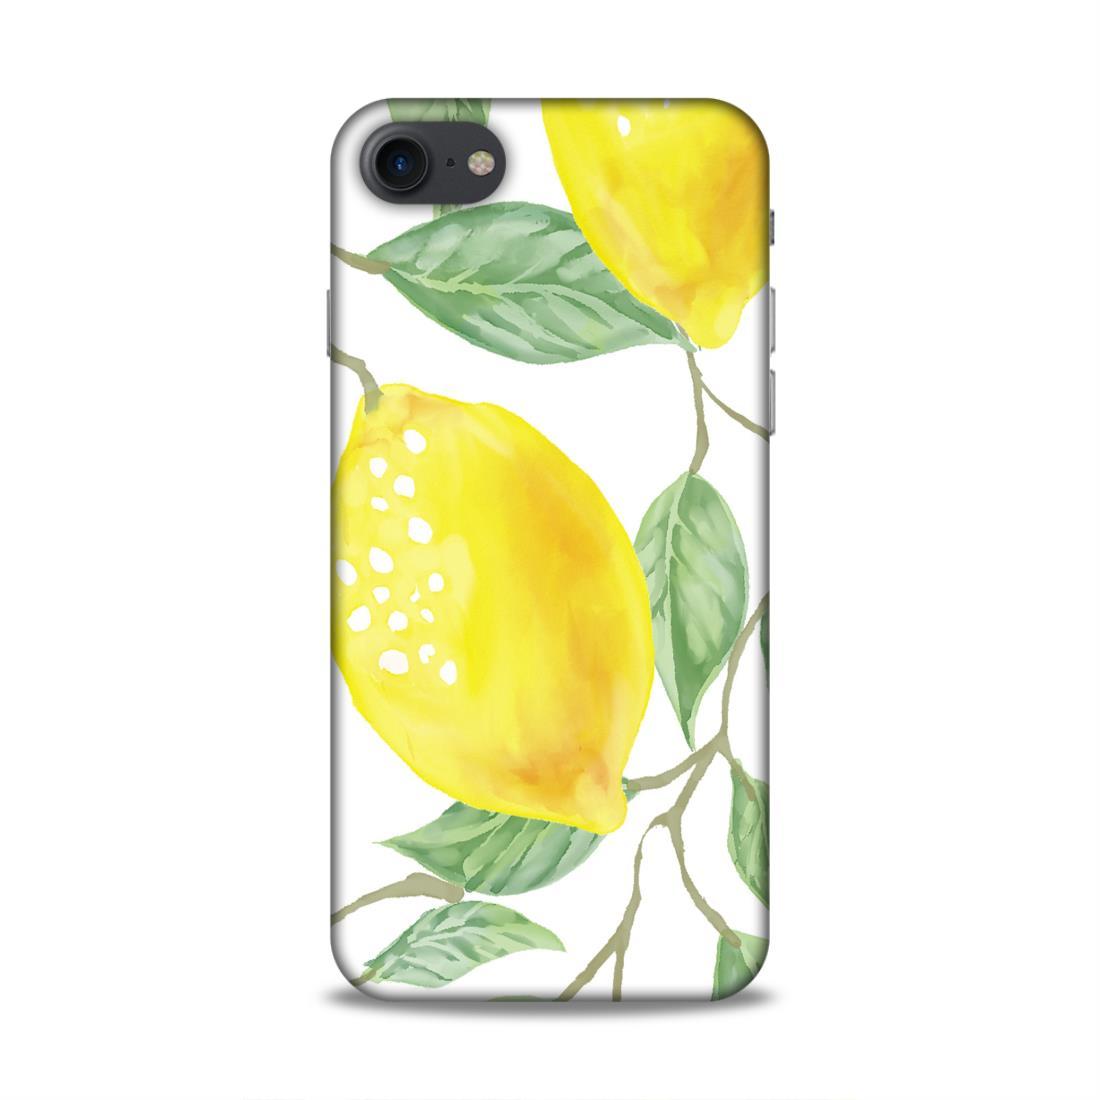 Mango Waterpainting iPhone 8 Mobile Back Case